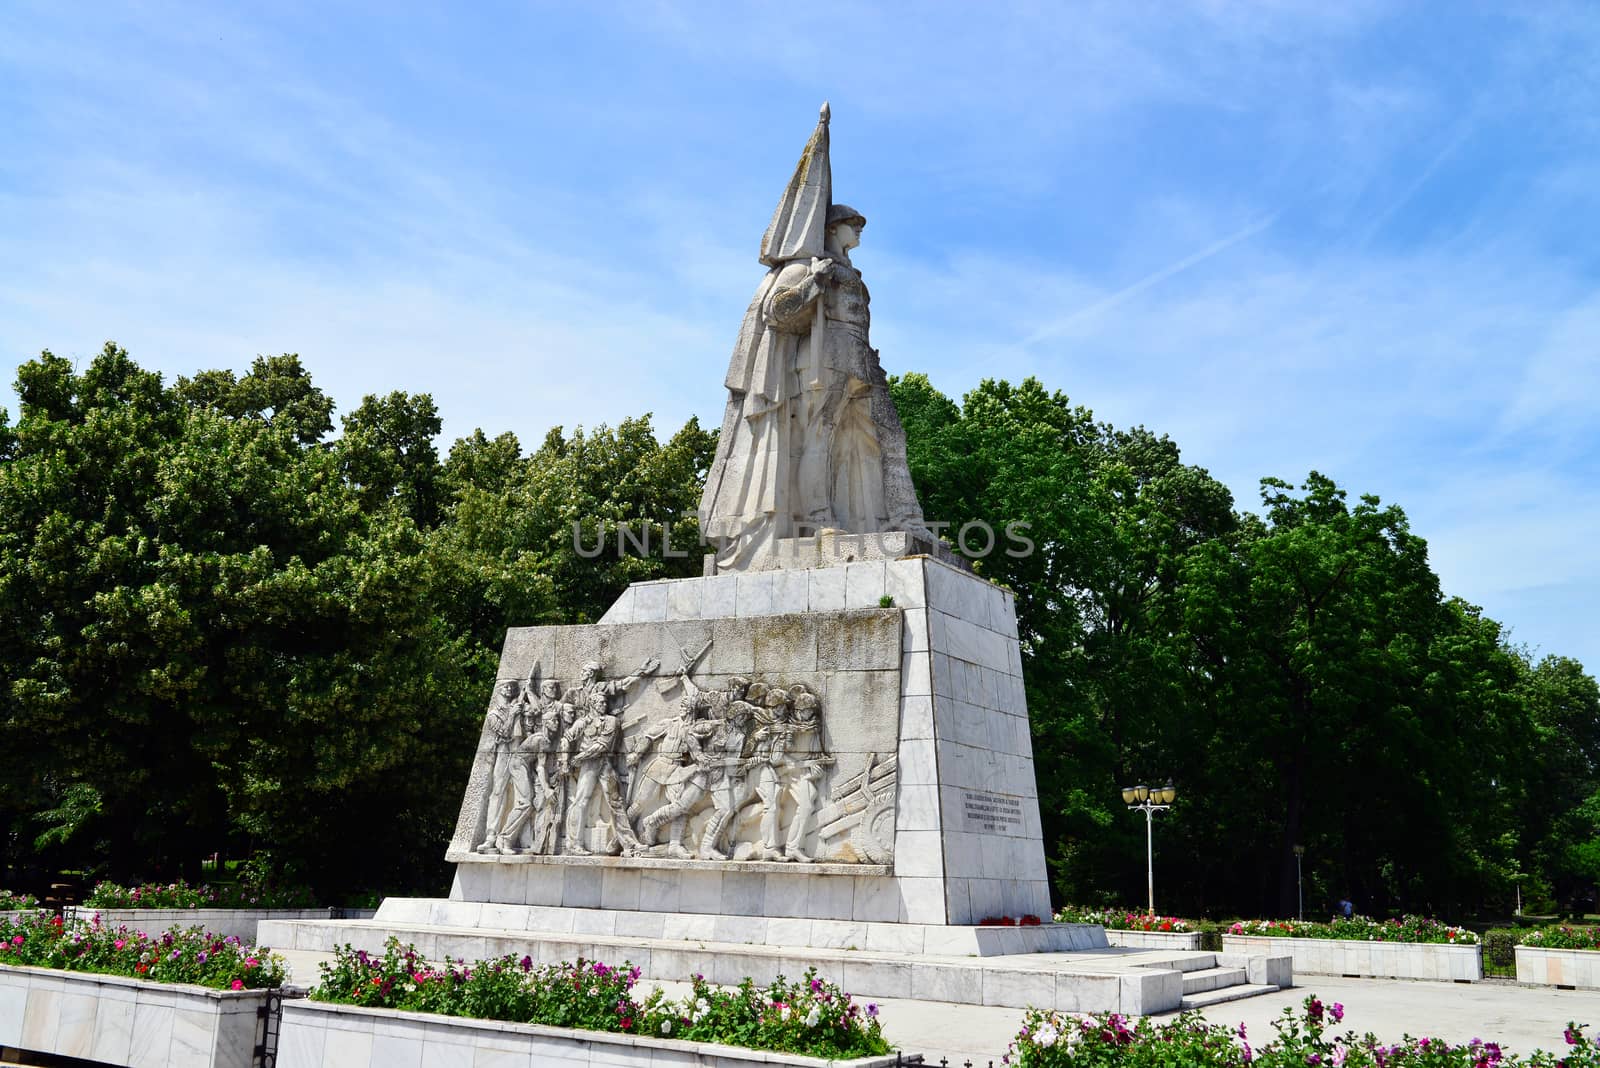 Timisoara Monument of the Romanian Soldier by tony4urban